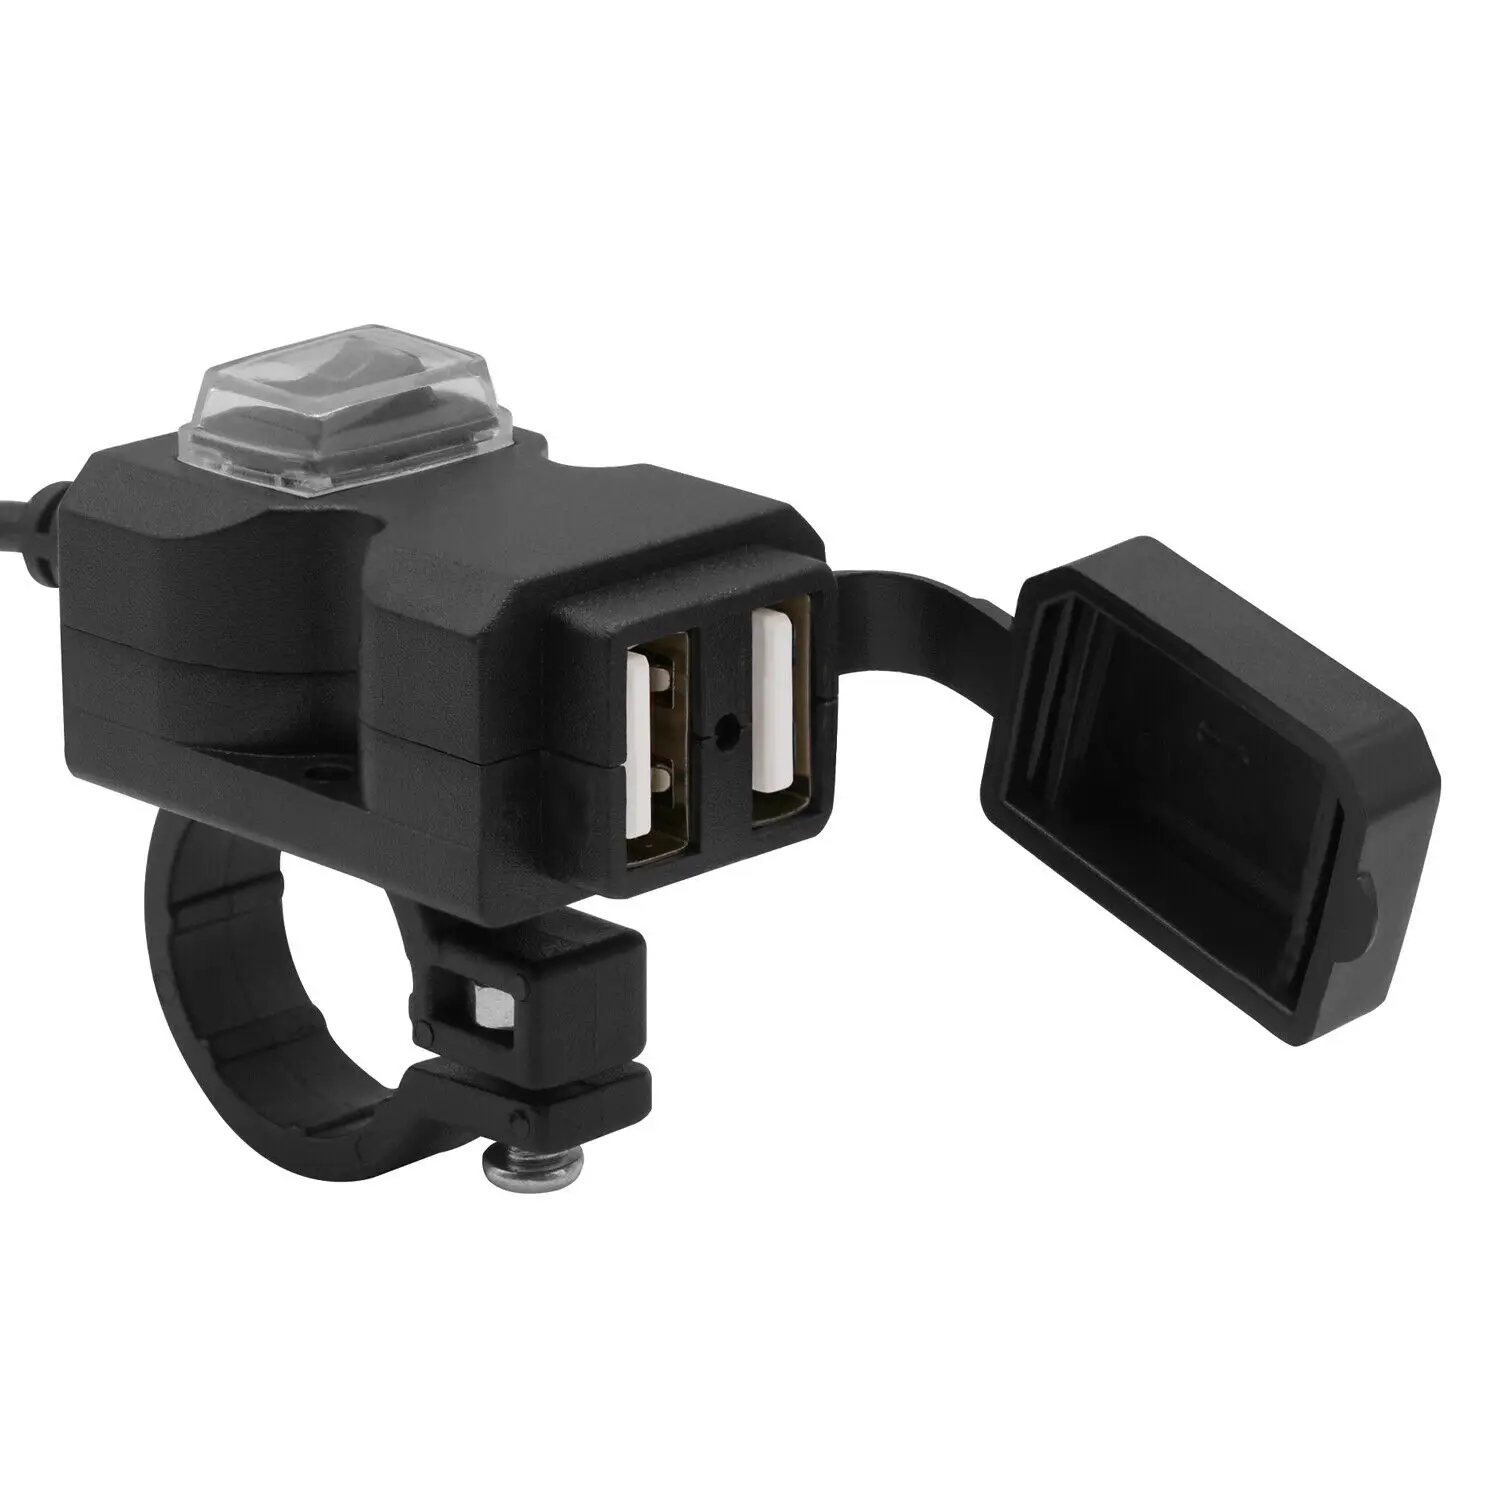 

Dual USB Port Waterproof Motorcycle Handlebar Charger 5V 1A/2.1A Adapter Power Supply Socket for Phone Mobile 9-90V